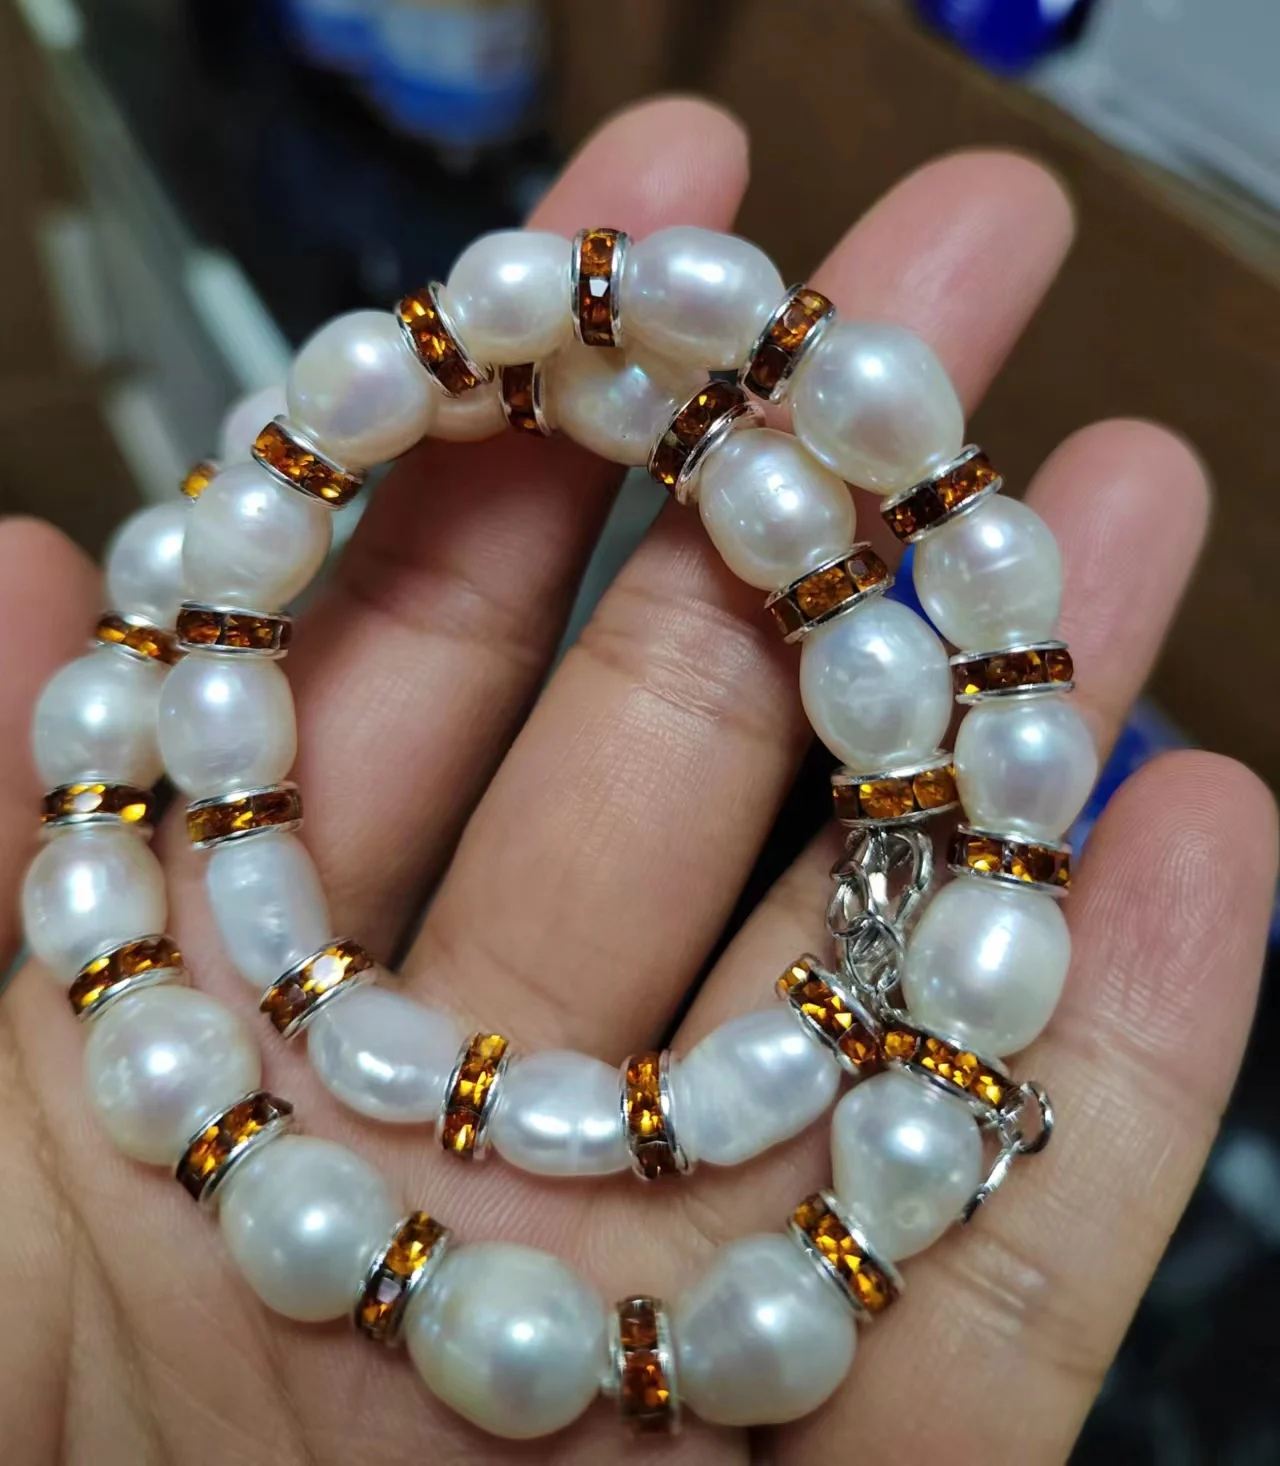 

New Arriver Pearl Jewelry 7-8mm Rice White Freshwater Cultured Pearl Necklace for Wome Gift Brown Rhinestone 33cm Necklace